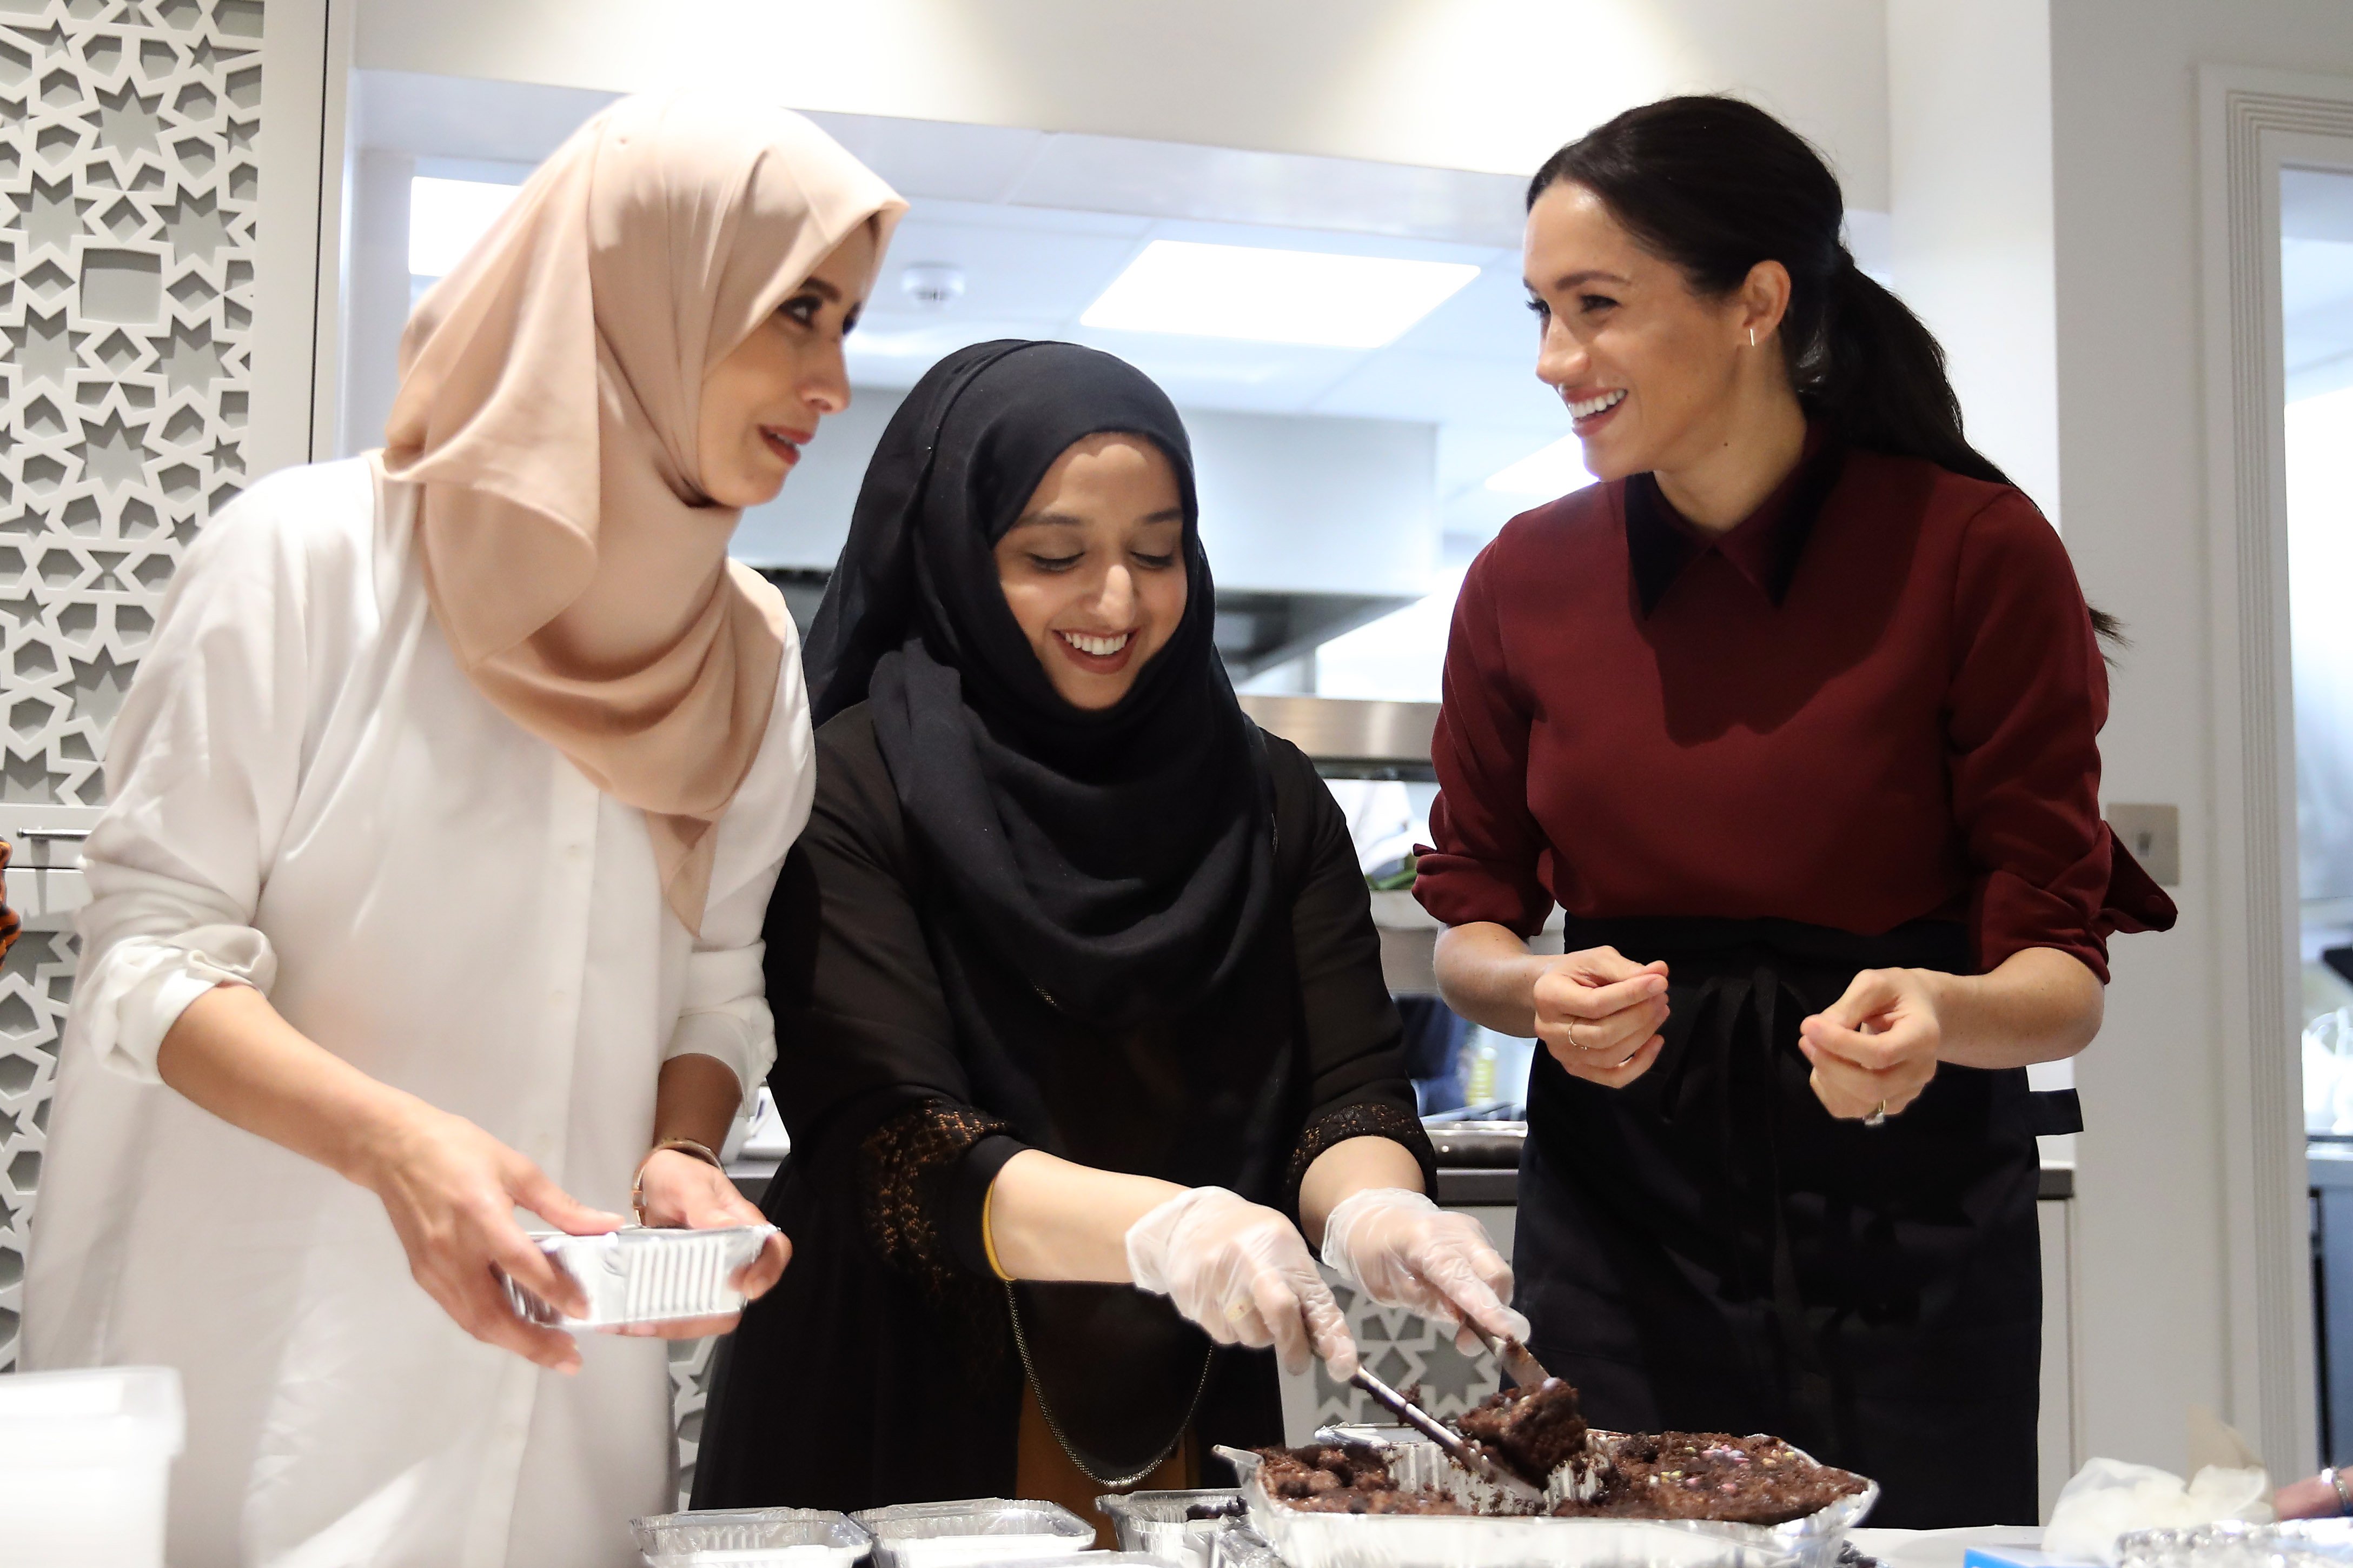 Meghan Markle (R) at the charity organization Hubb Community Kitchen smiling and preparing food while wearing a red sweater.